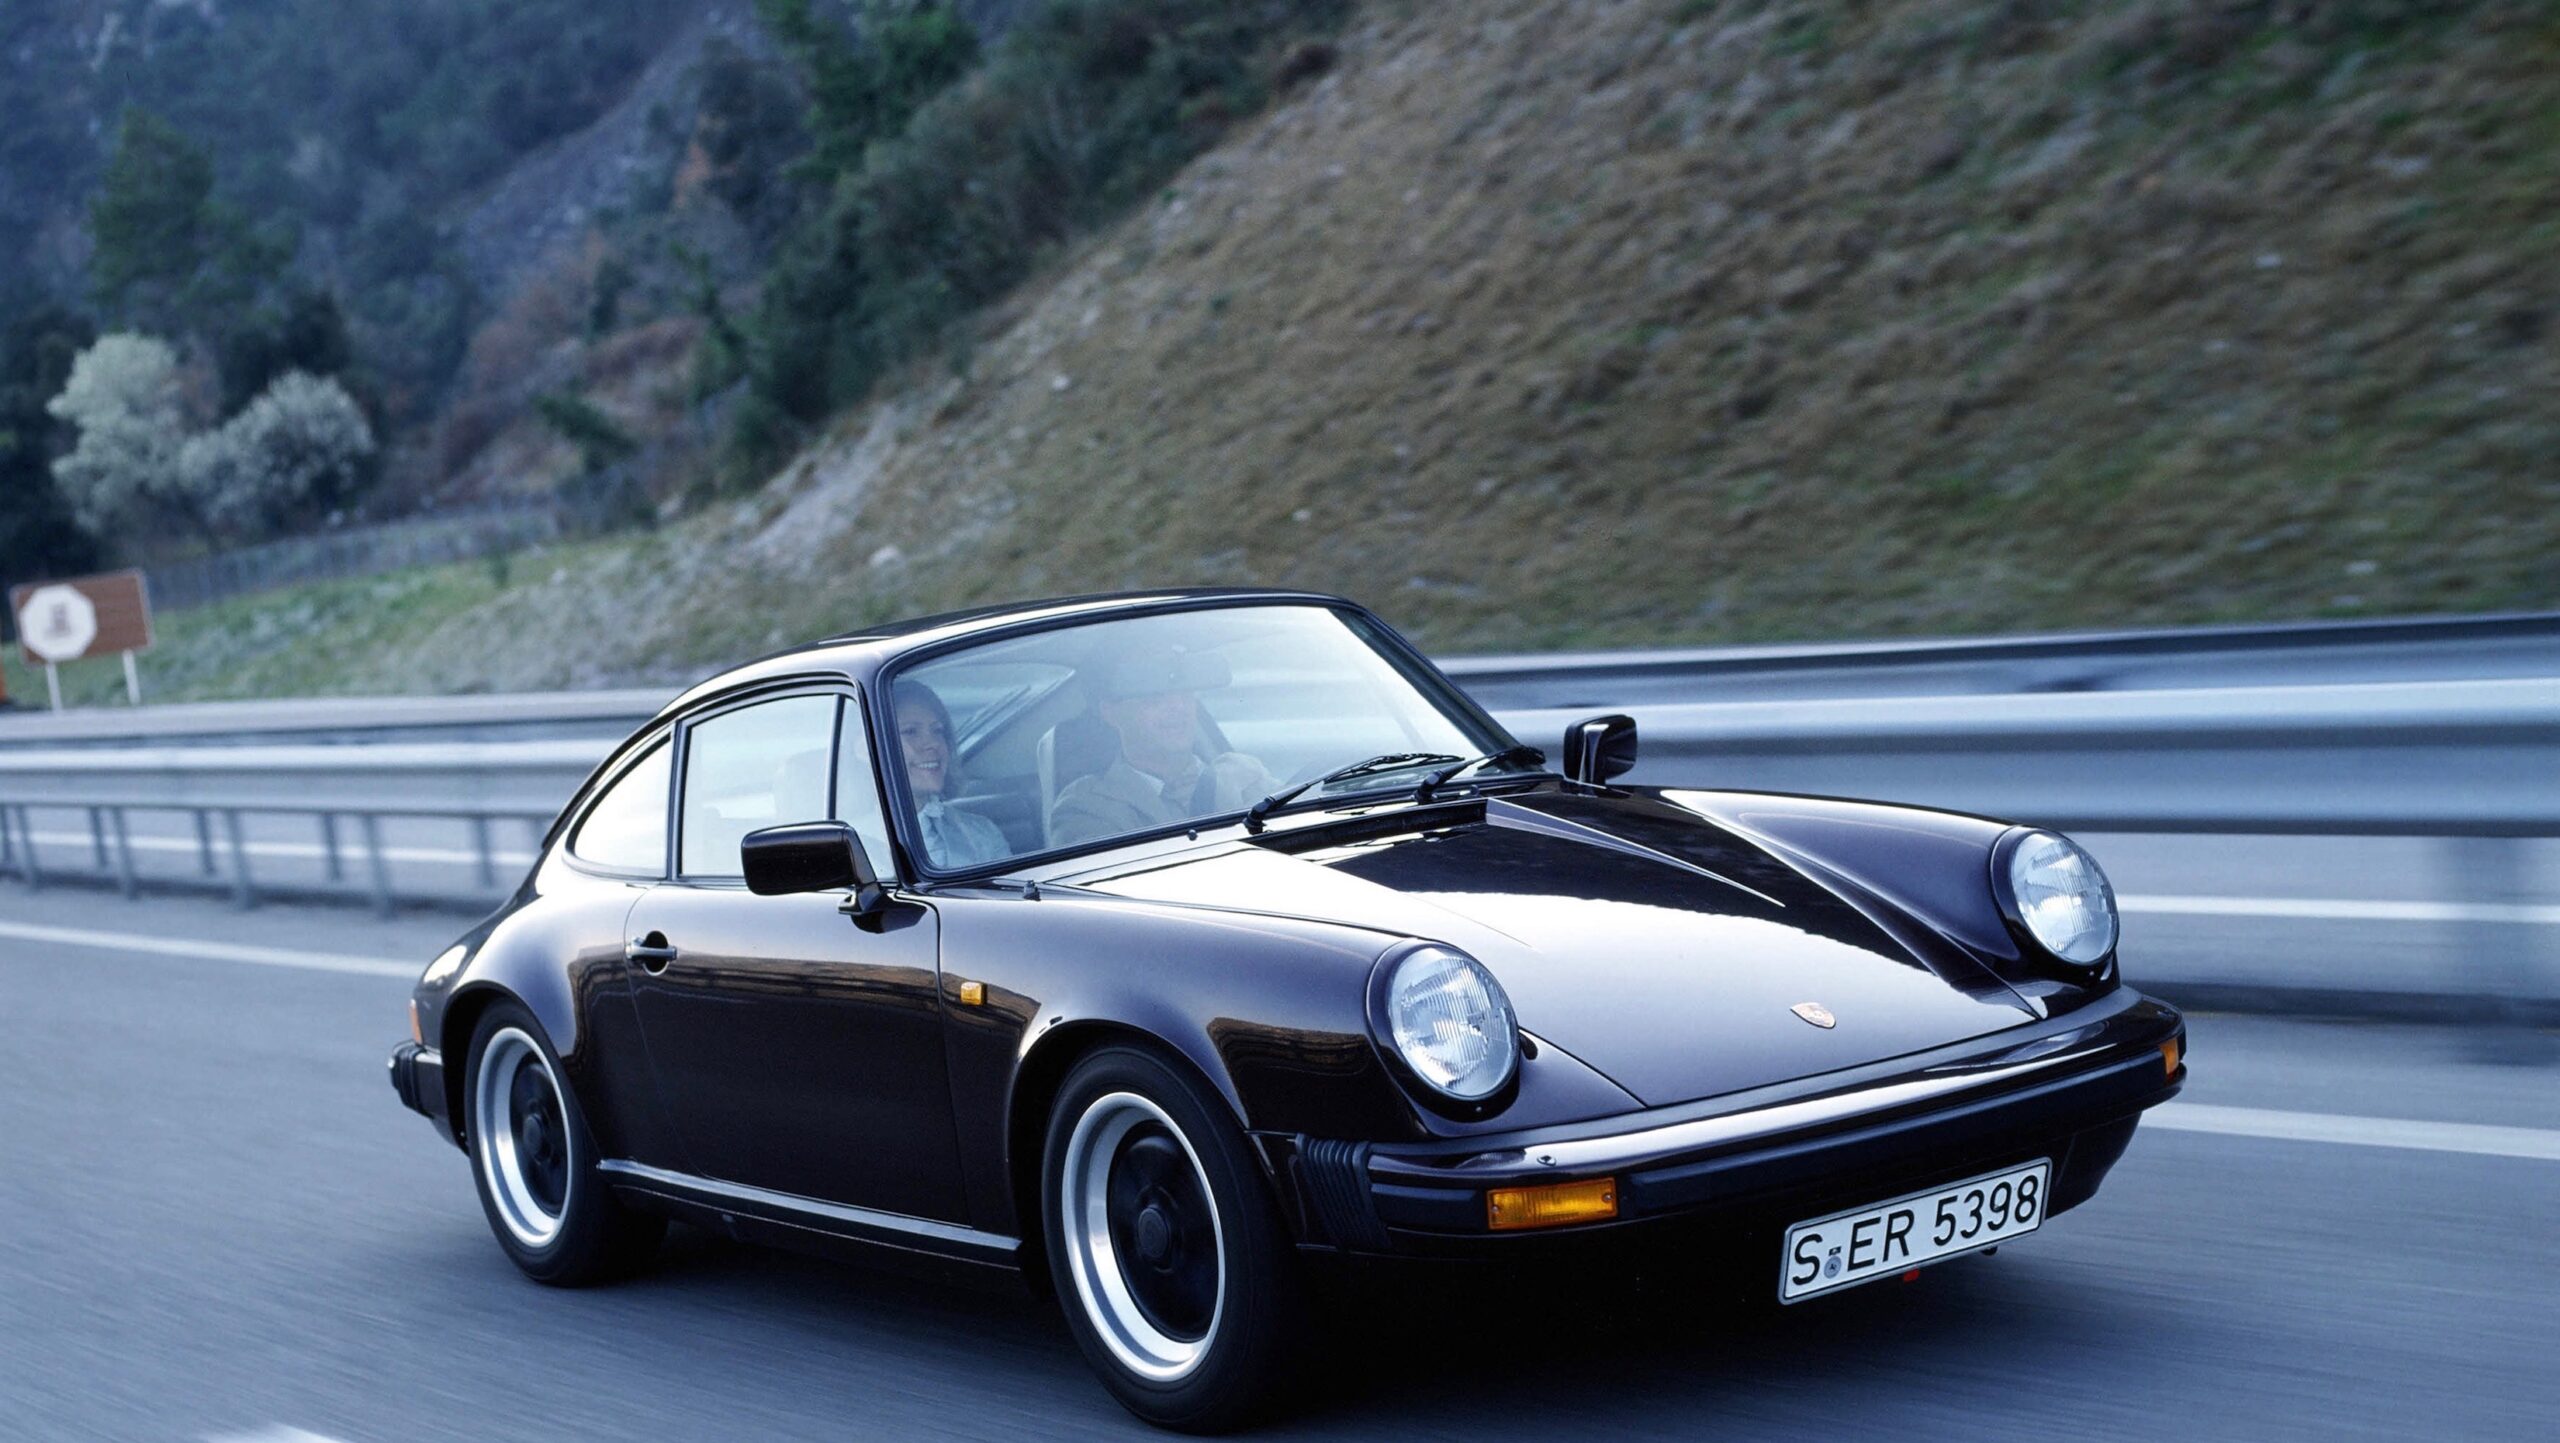 The G Model The 911 Gets Off to a Flying Start